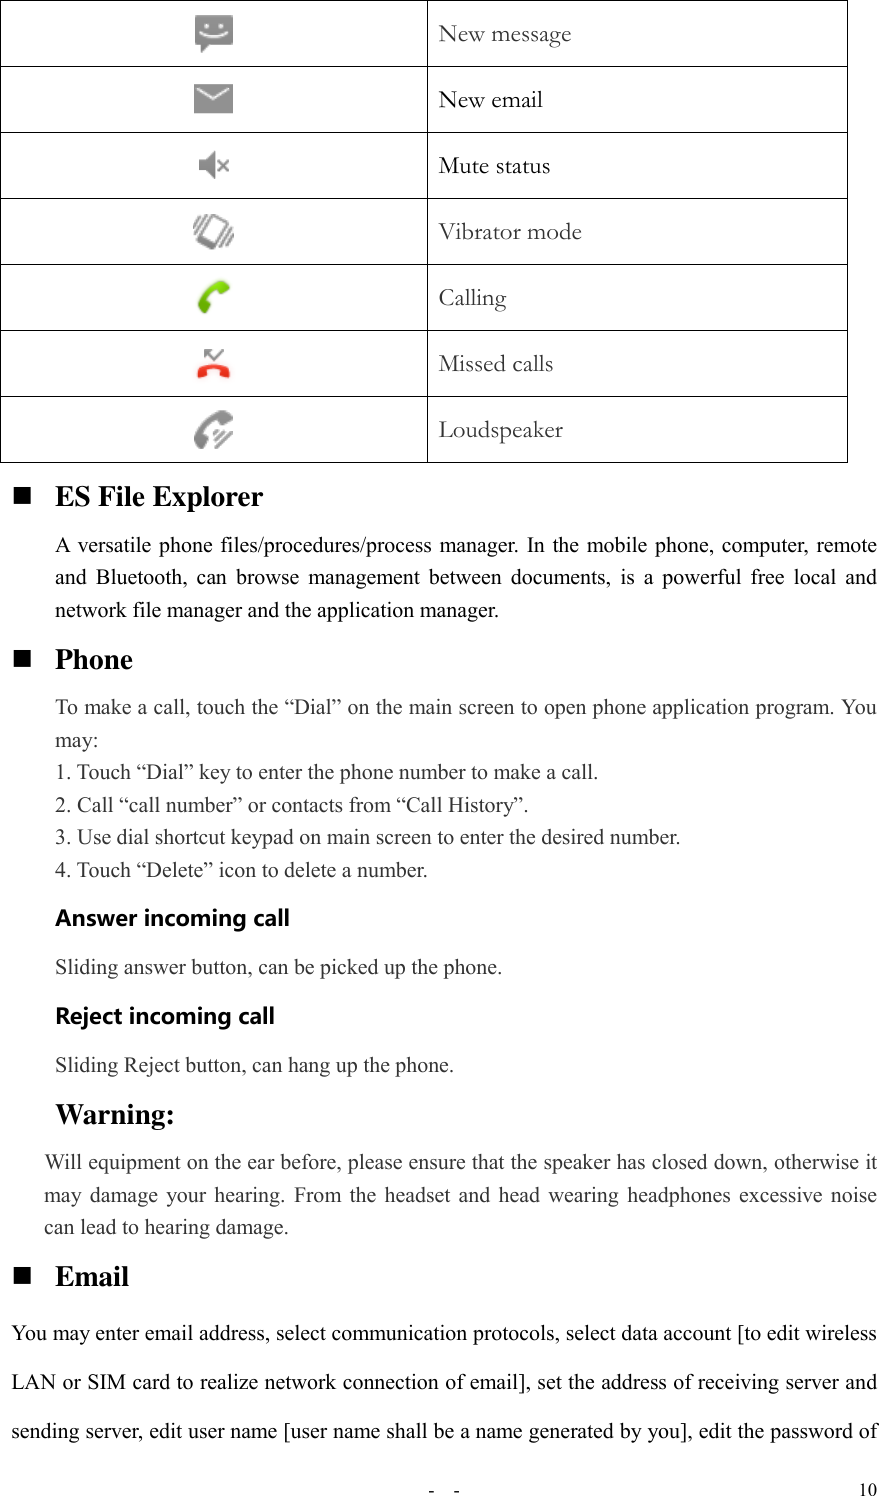   -  - 10  ES File Explorer A versatile phone files/procedures/process manager. In the mobile phone, computer, remote and Bluetooth, can  browse  management between documents,  is  a powerful free local  and network file manager and the application manager.    Phone To make a call, touch the “Dial” on the main screen to open phone application program. You may: 1. Touch “Dial” key to enter the phone number to make a call. 2. Call “call number” or contacts from “Call History”. 3. Use dial shortcut keypad on main screen to enter the desired number. 4. Touch “Delete” icon to delete a number. Answer incoming call Sliding answer button, can be picked up the phone. Reject incoming call Sliding Reject button, can hang up the phone. Warning:     Will equipment on the ear before, please ensure that the speaker has closed down, otherwise it may damage your hearing. From the headset and head wearing headphones excessive noise can lead to hearing damage.  Email You may enter email address, select communication protocols, select data account [to edit wireless LAN or SIM card to realize network connection of email], set the address of receiving server and sending server, edit user name [user name shall be a name generated by you], edit the password of  New message  New email  Mute status  Vibrator mode  Calling  Missed calls  Loudspeaker 